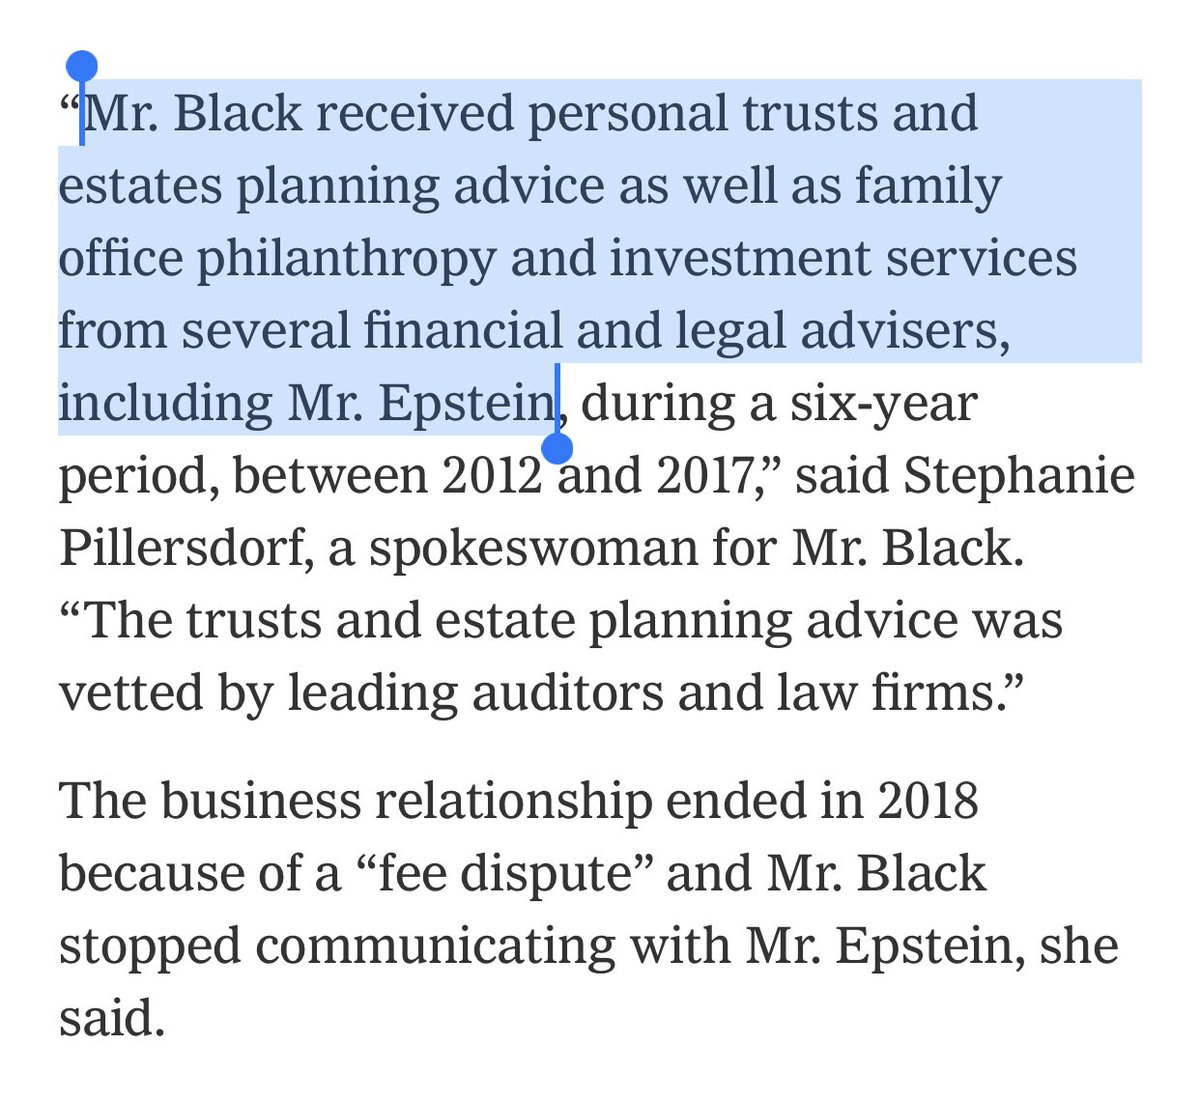 This is what Leon Black’s spokeswoman says to explain the $50M+ payments to Epstein.It raises as many questions as it answers.Also noteworthy that the relationship supposedly ended because of a “fee dispute,” not because of Black having any misgivings about Epstein.